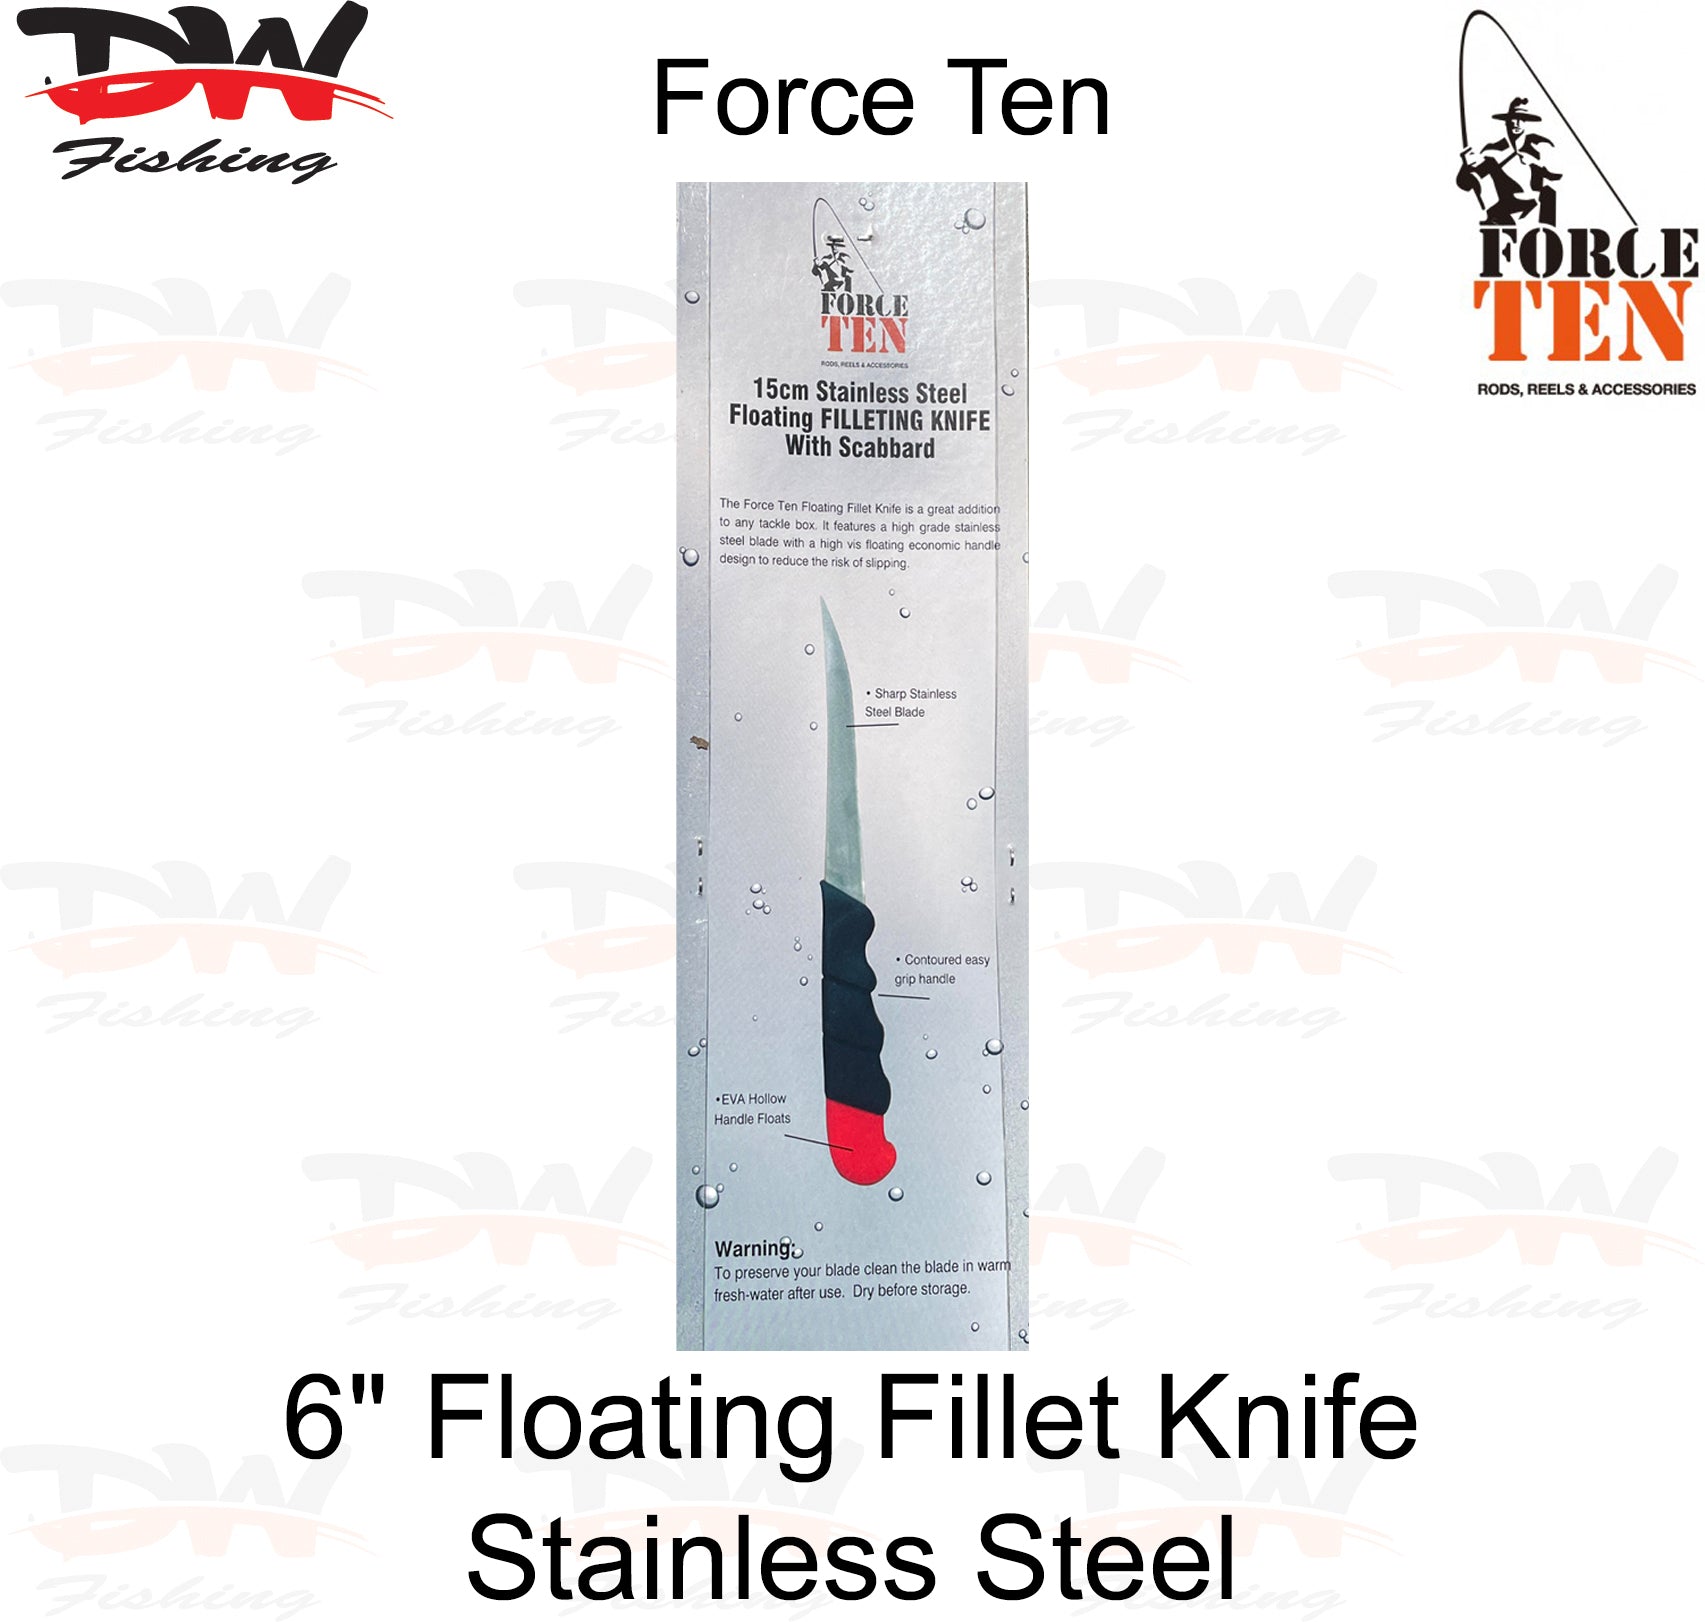 Force Ten brand fish fillet knife 15cm blade length with protective sheath back of packet